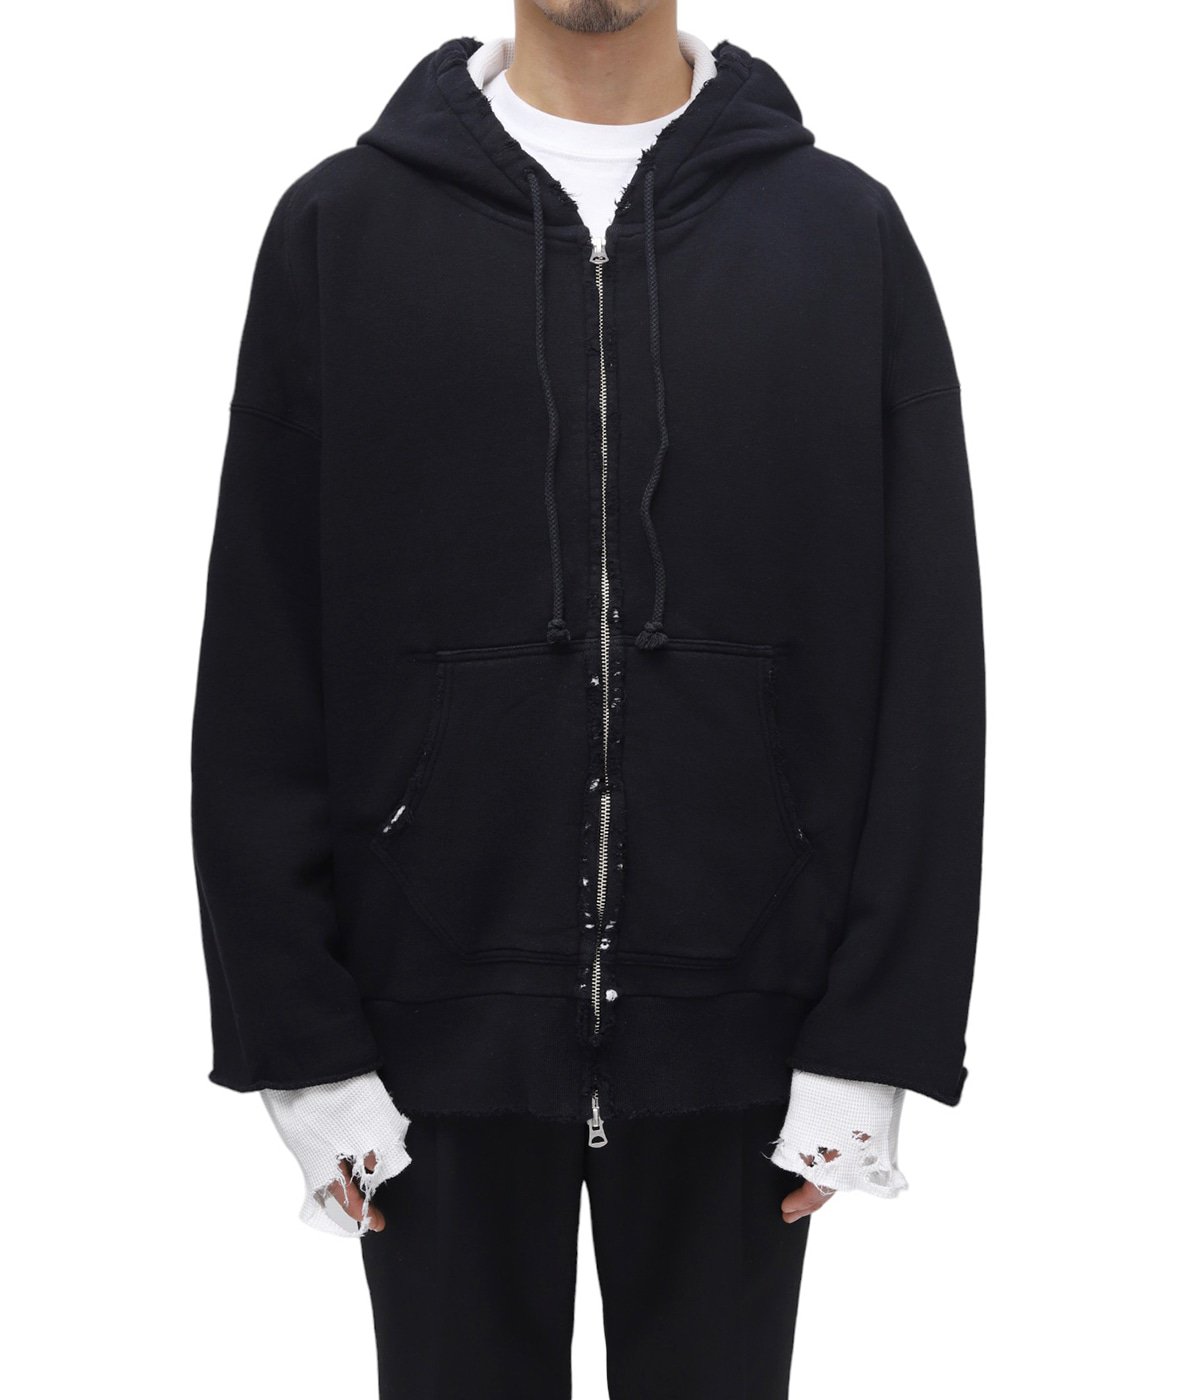 23AW Ancellm ZIP-UP HOODIE 2 ブラック - トップス